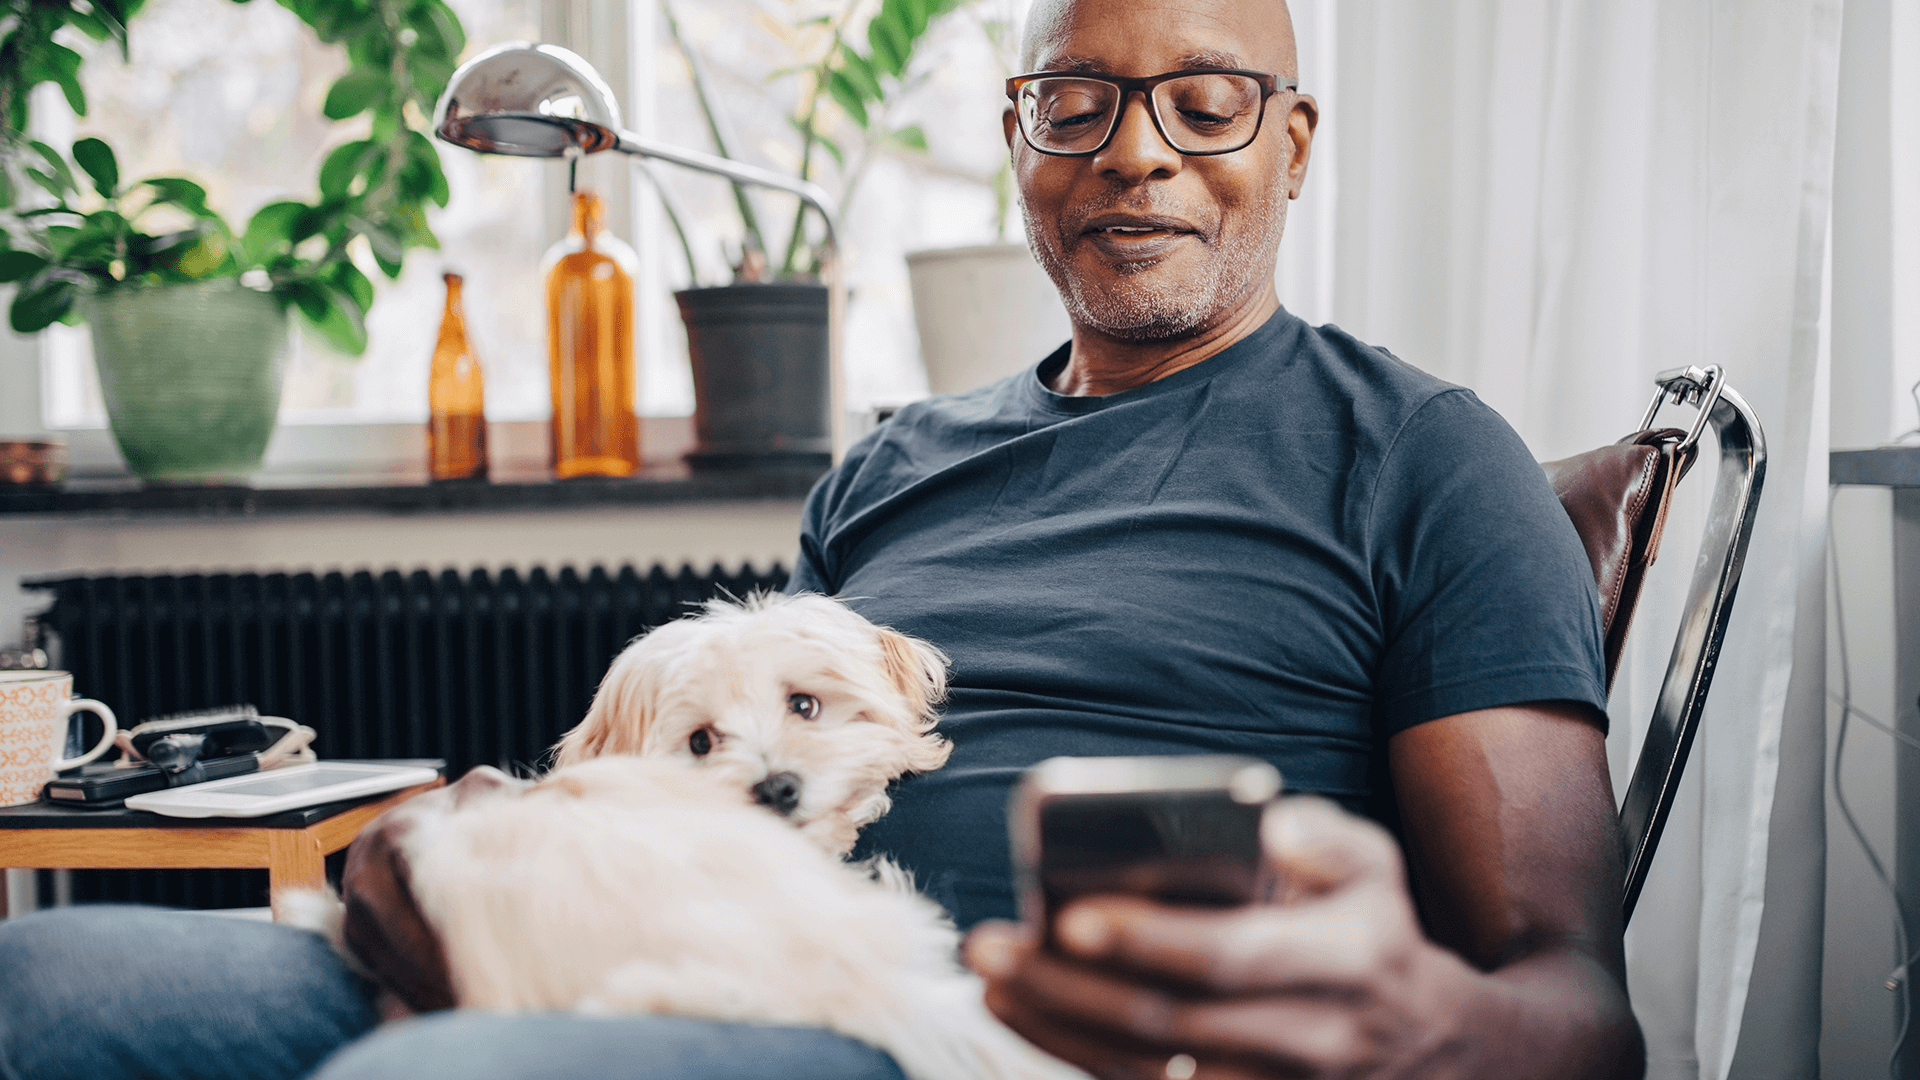 Image featuring a man wearing glasses looking at his cellphone, with a small white dog on his lap.